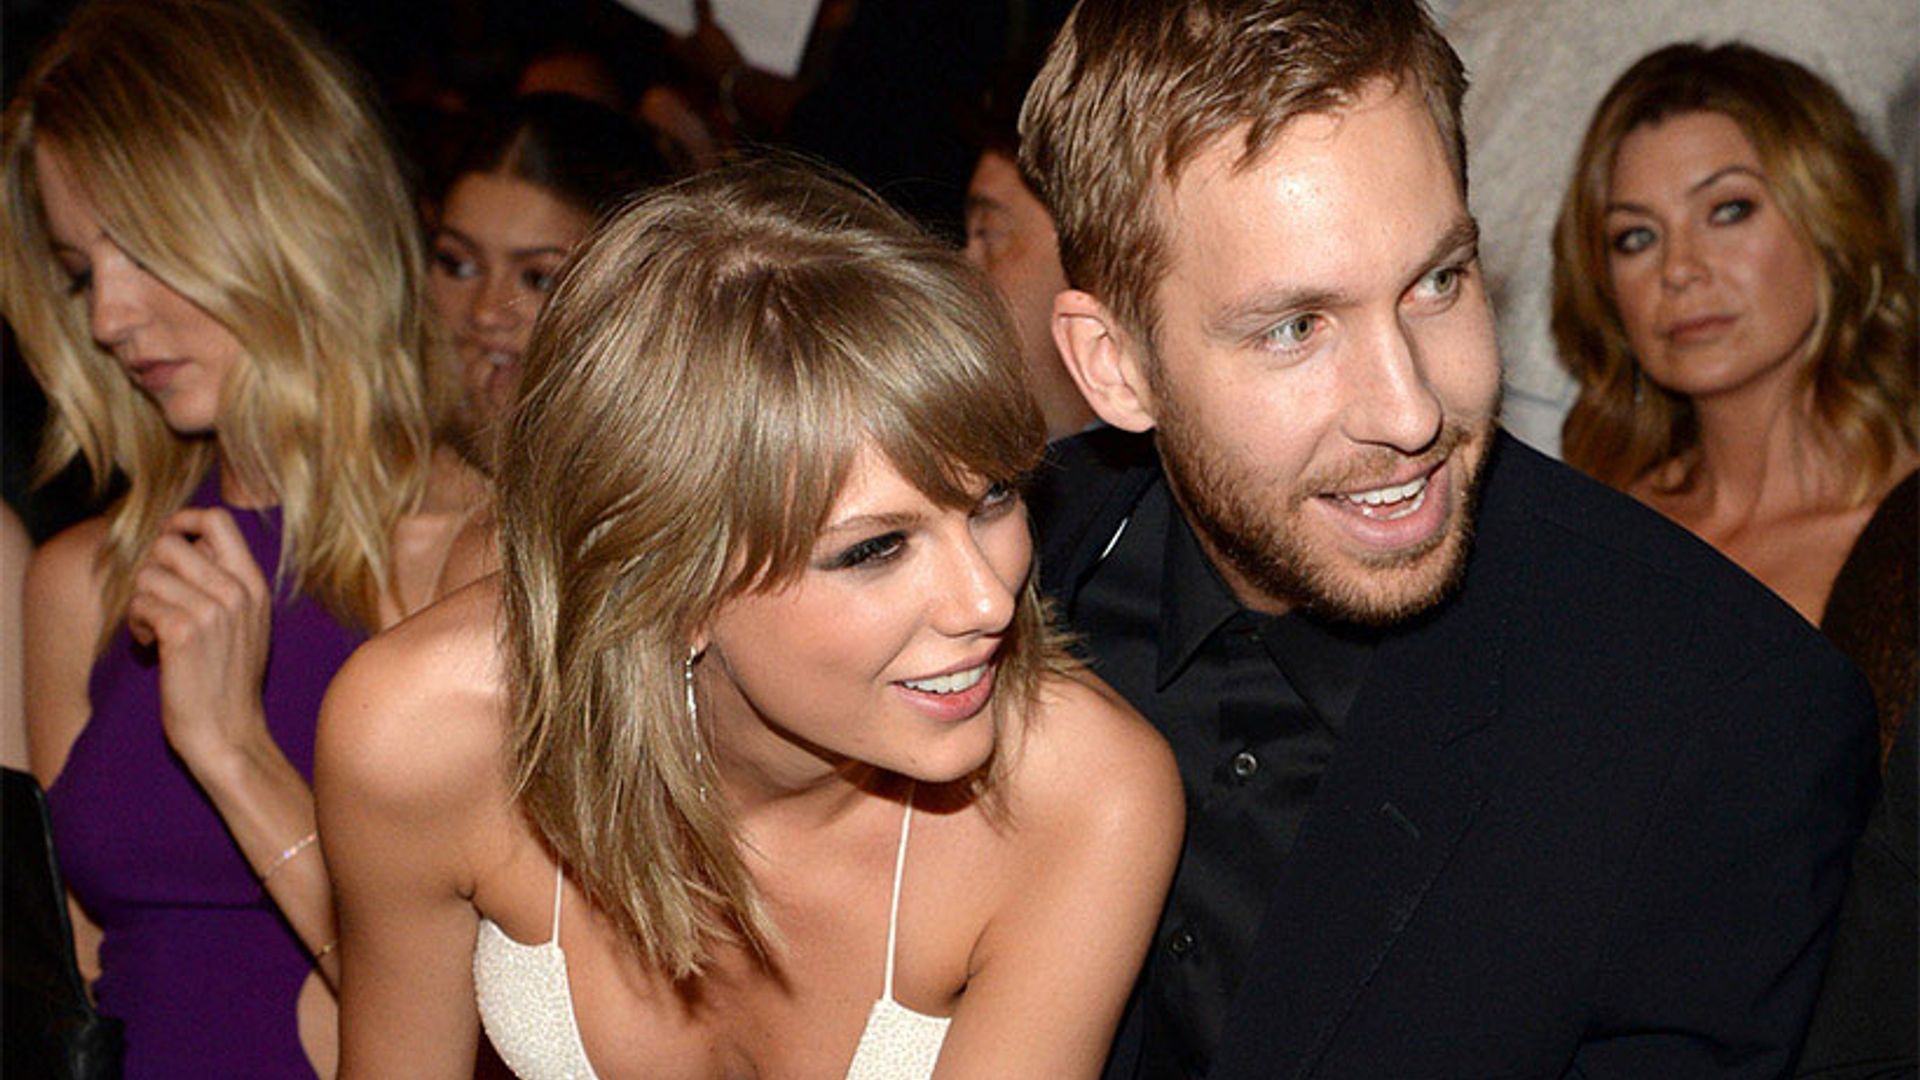 Calvin Harris suggests Taylor Swift left him in now deleted Instagram comments